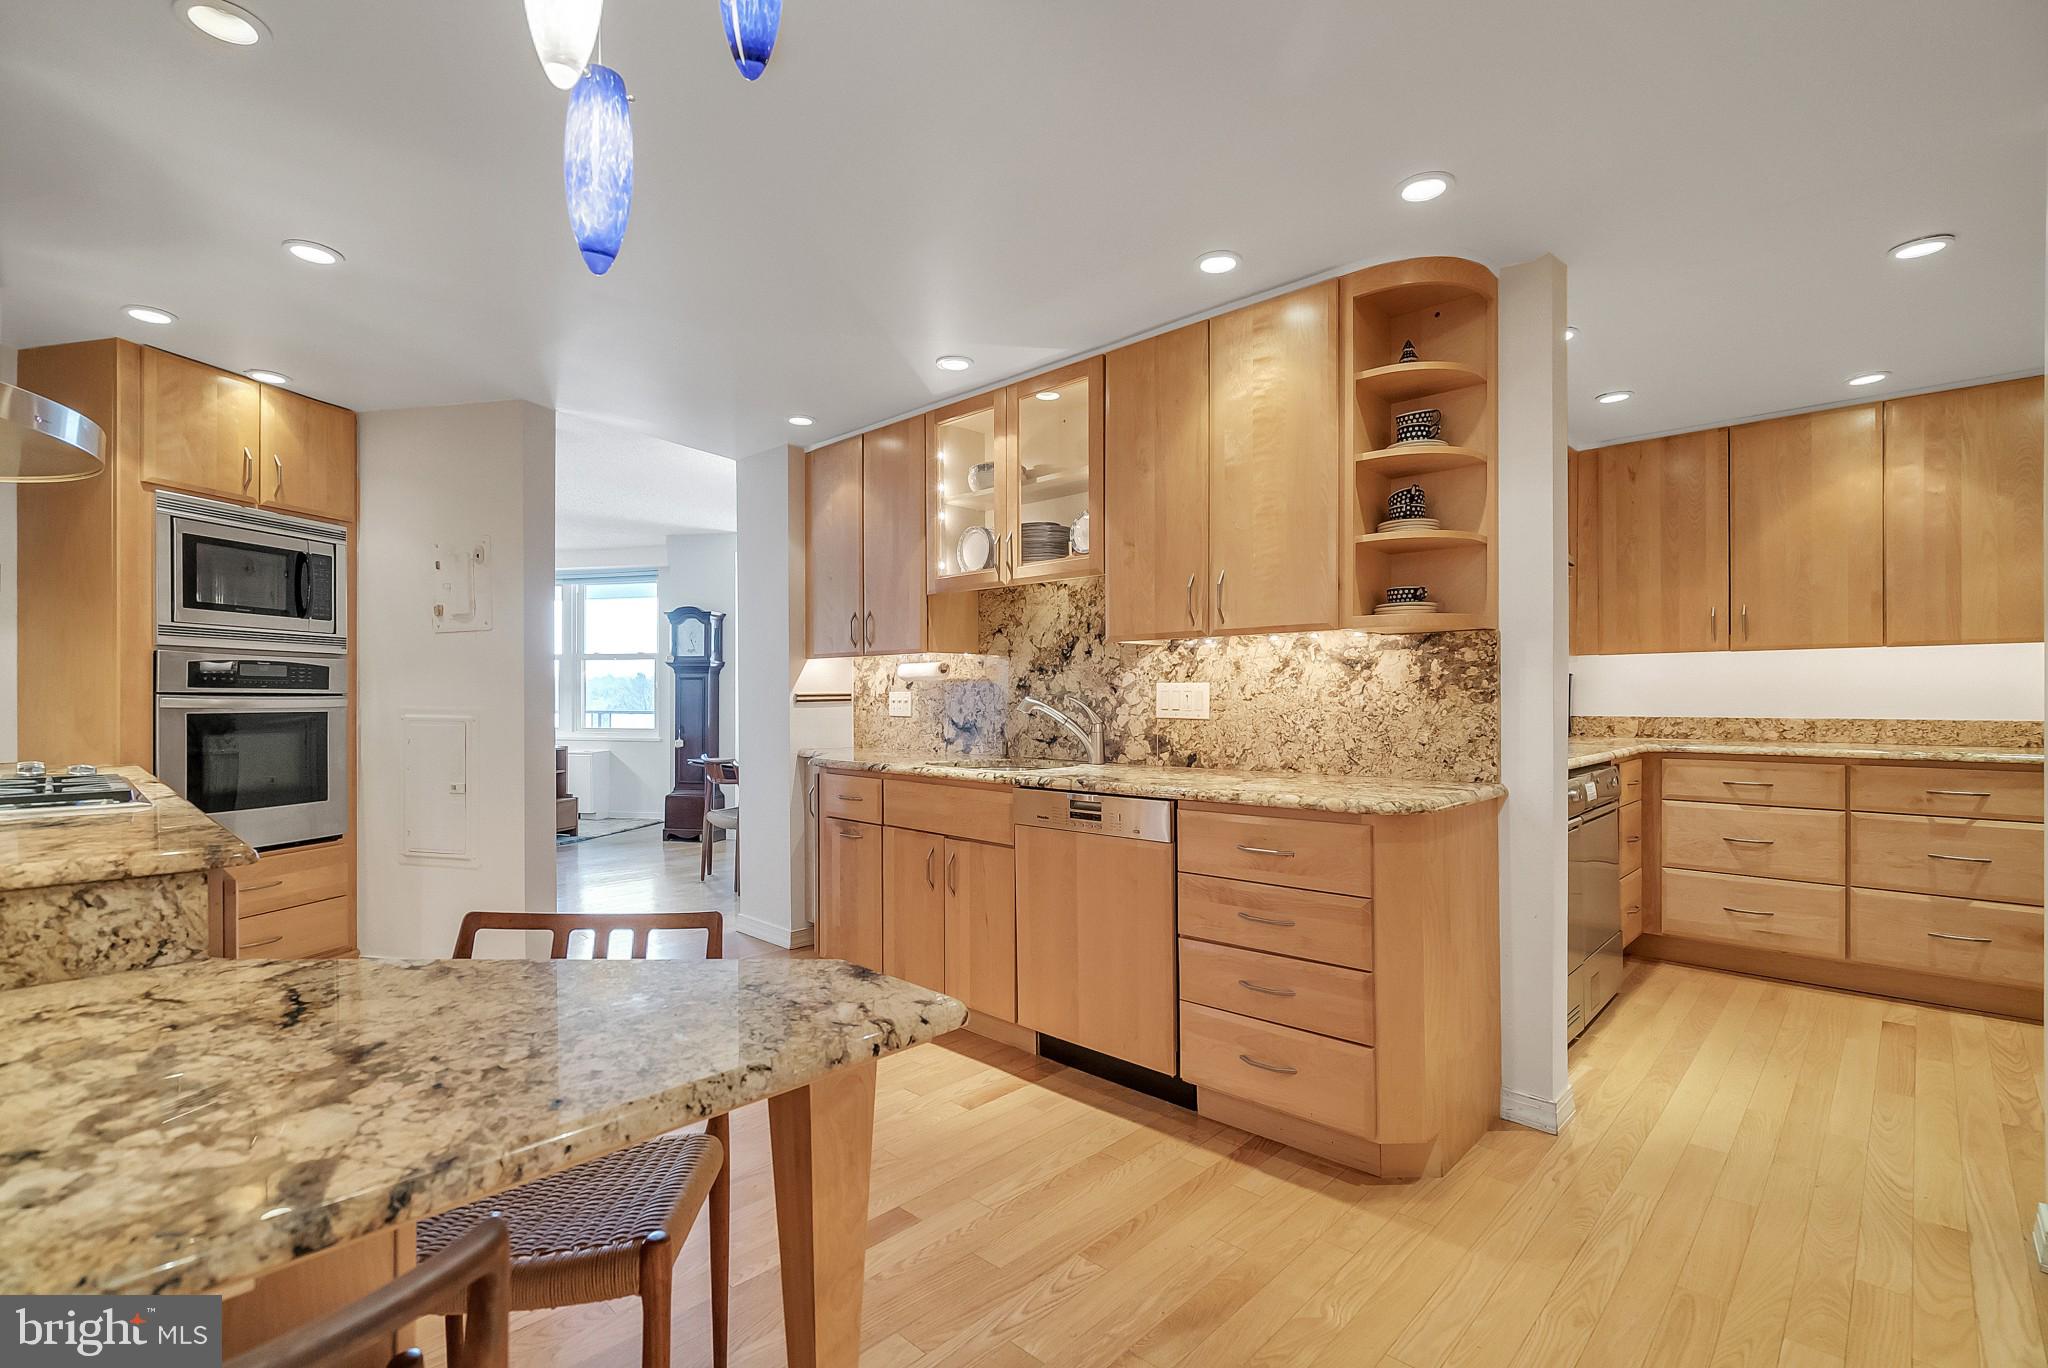 a kitchen with granite countertop cabinets and window